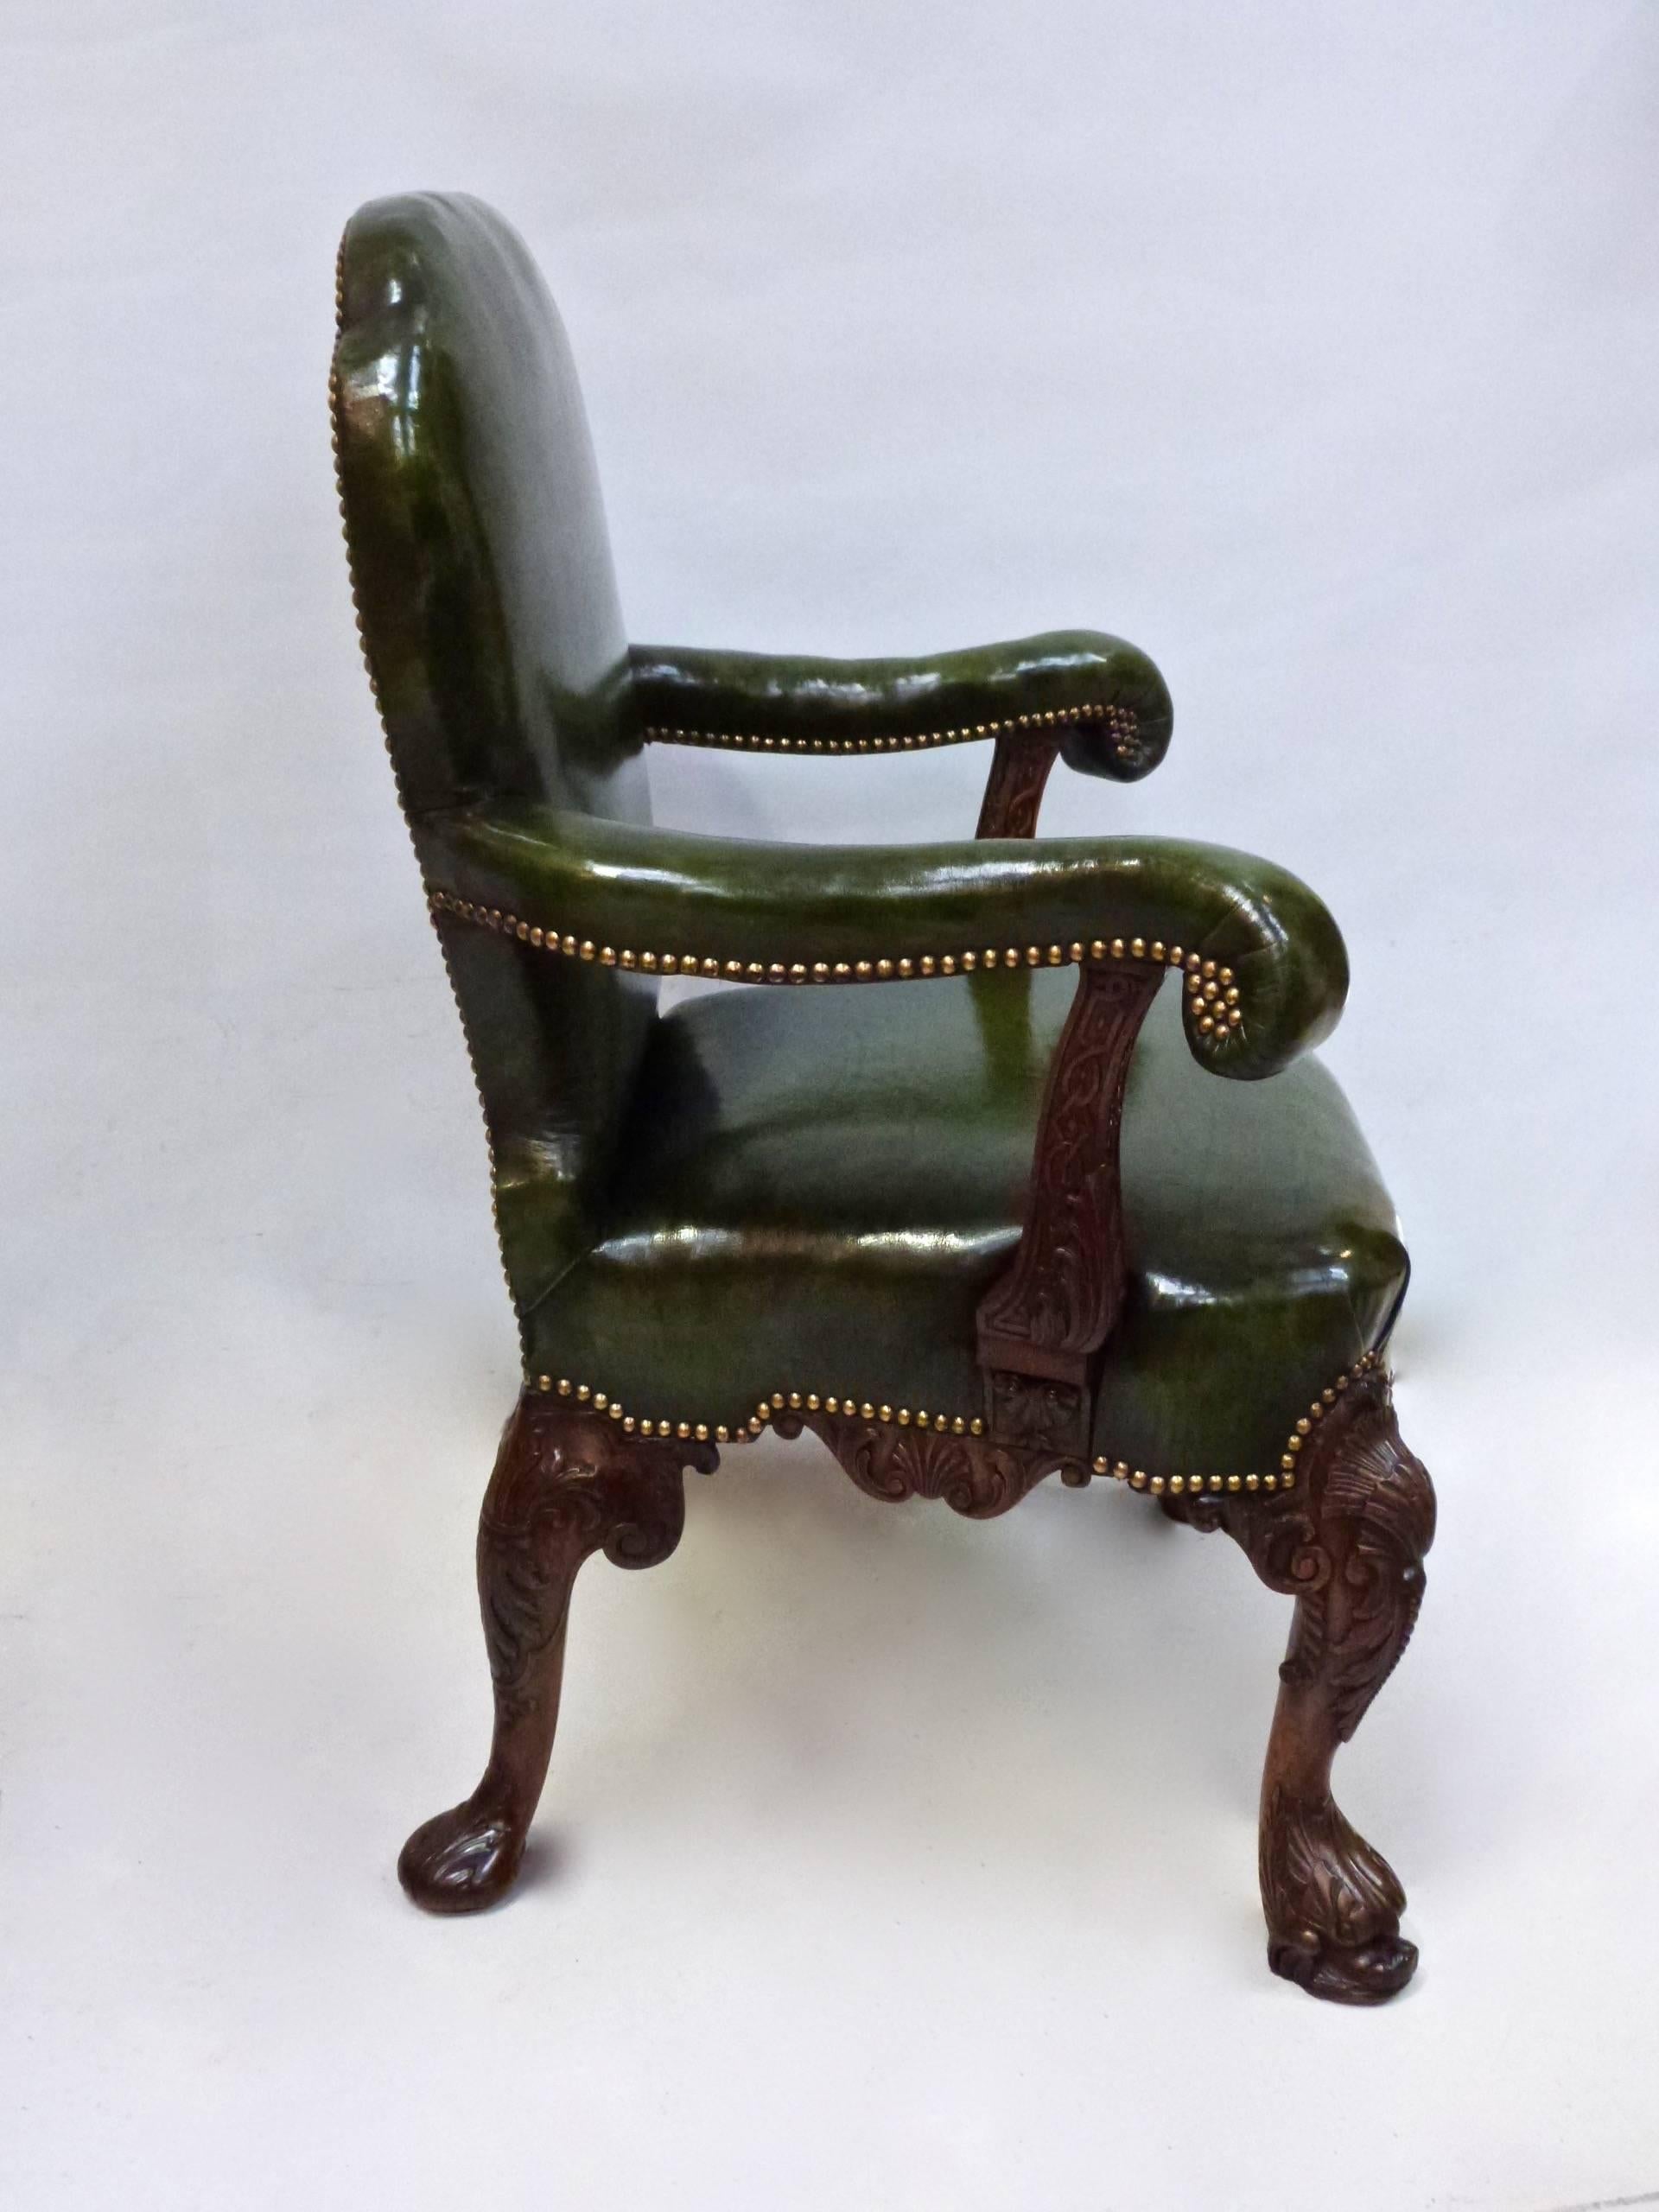 A superb quality George II style carved walnut library chair, circa 1850. (The trade label for London cabinet makers Landall and Gordon possibly a later addition.) Green leather upholstery also later.
A similar lady's chair is also available.